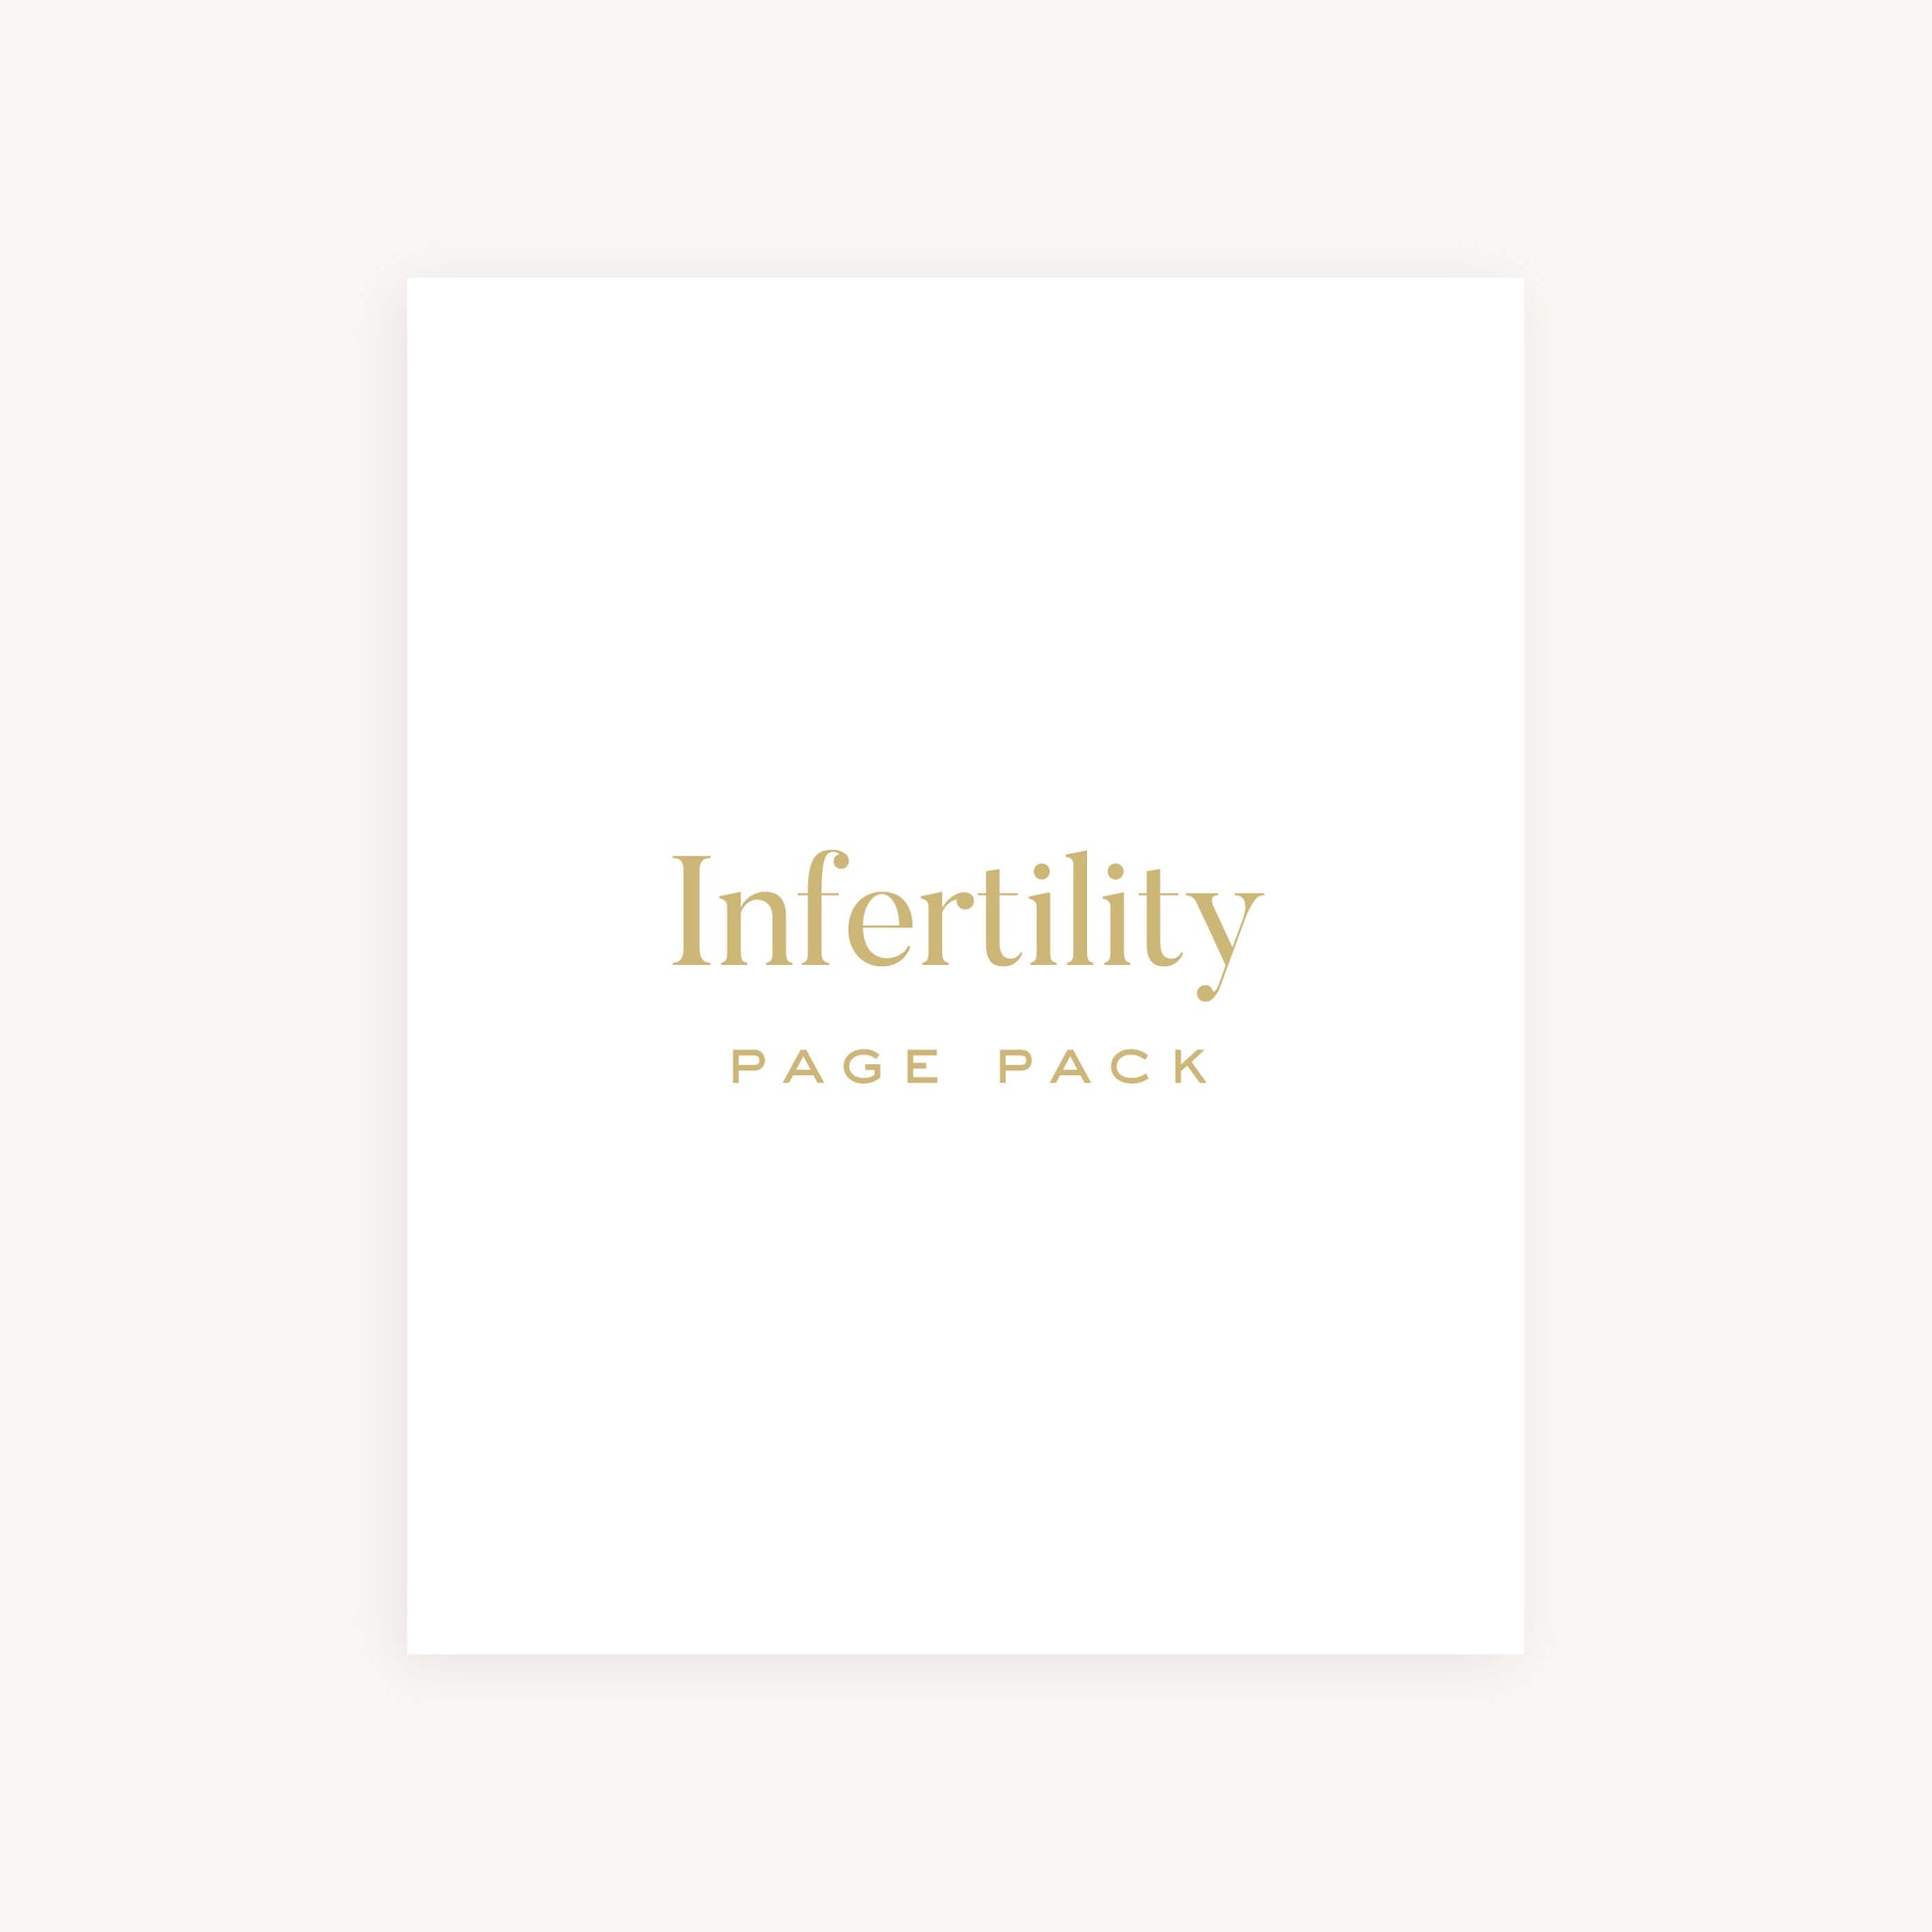 INFERTILITY BABY BOOK PAGE PACK